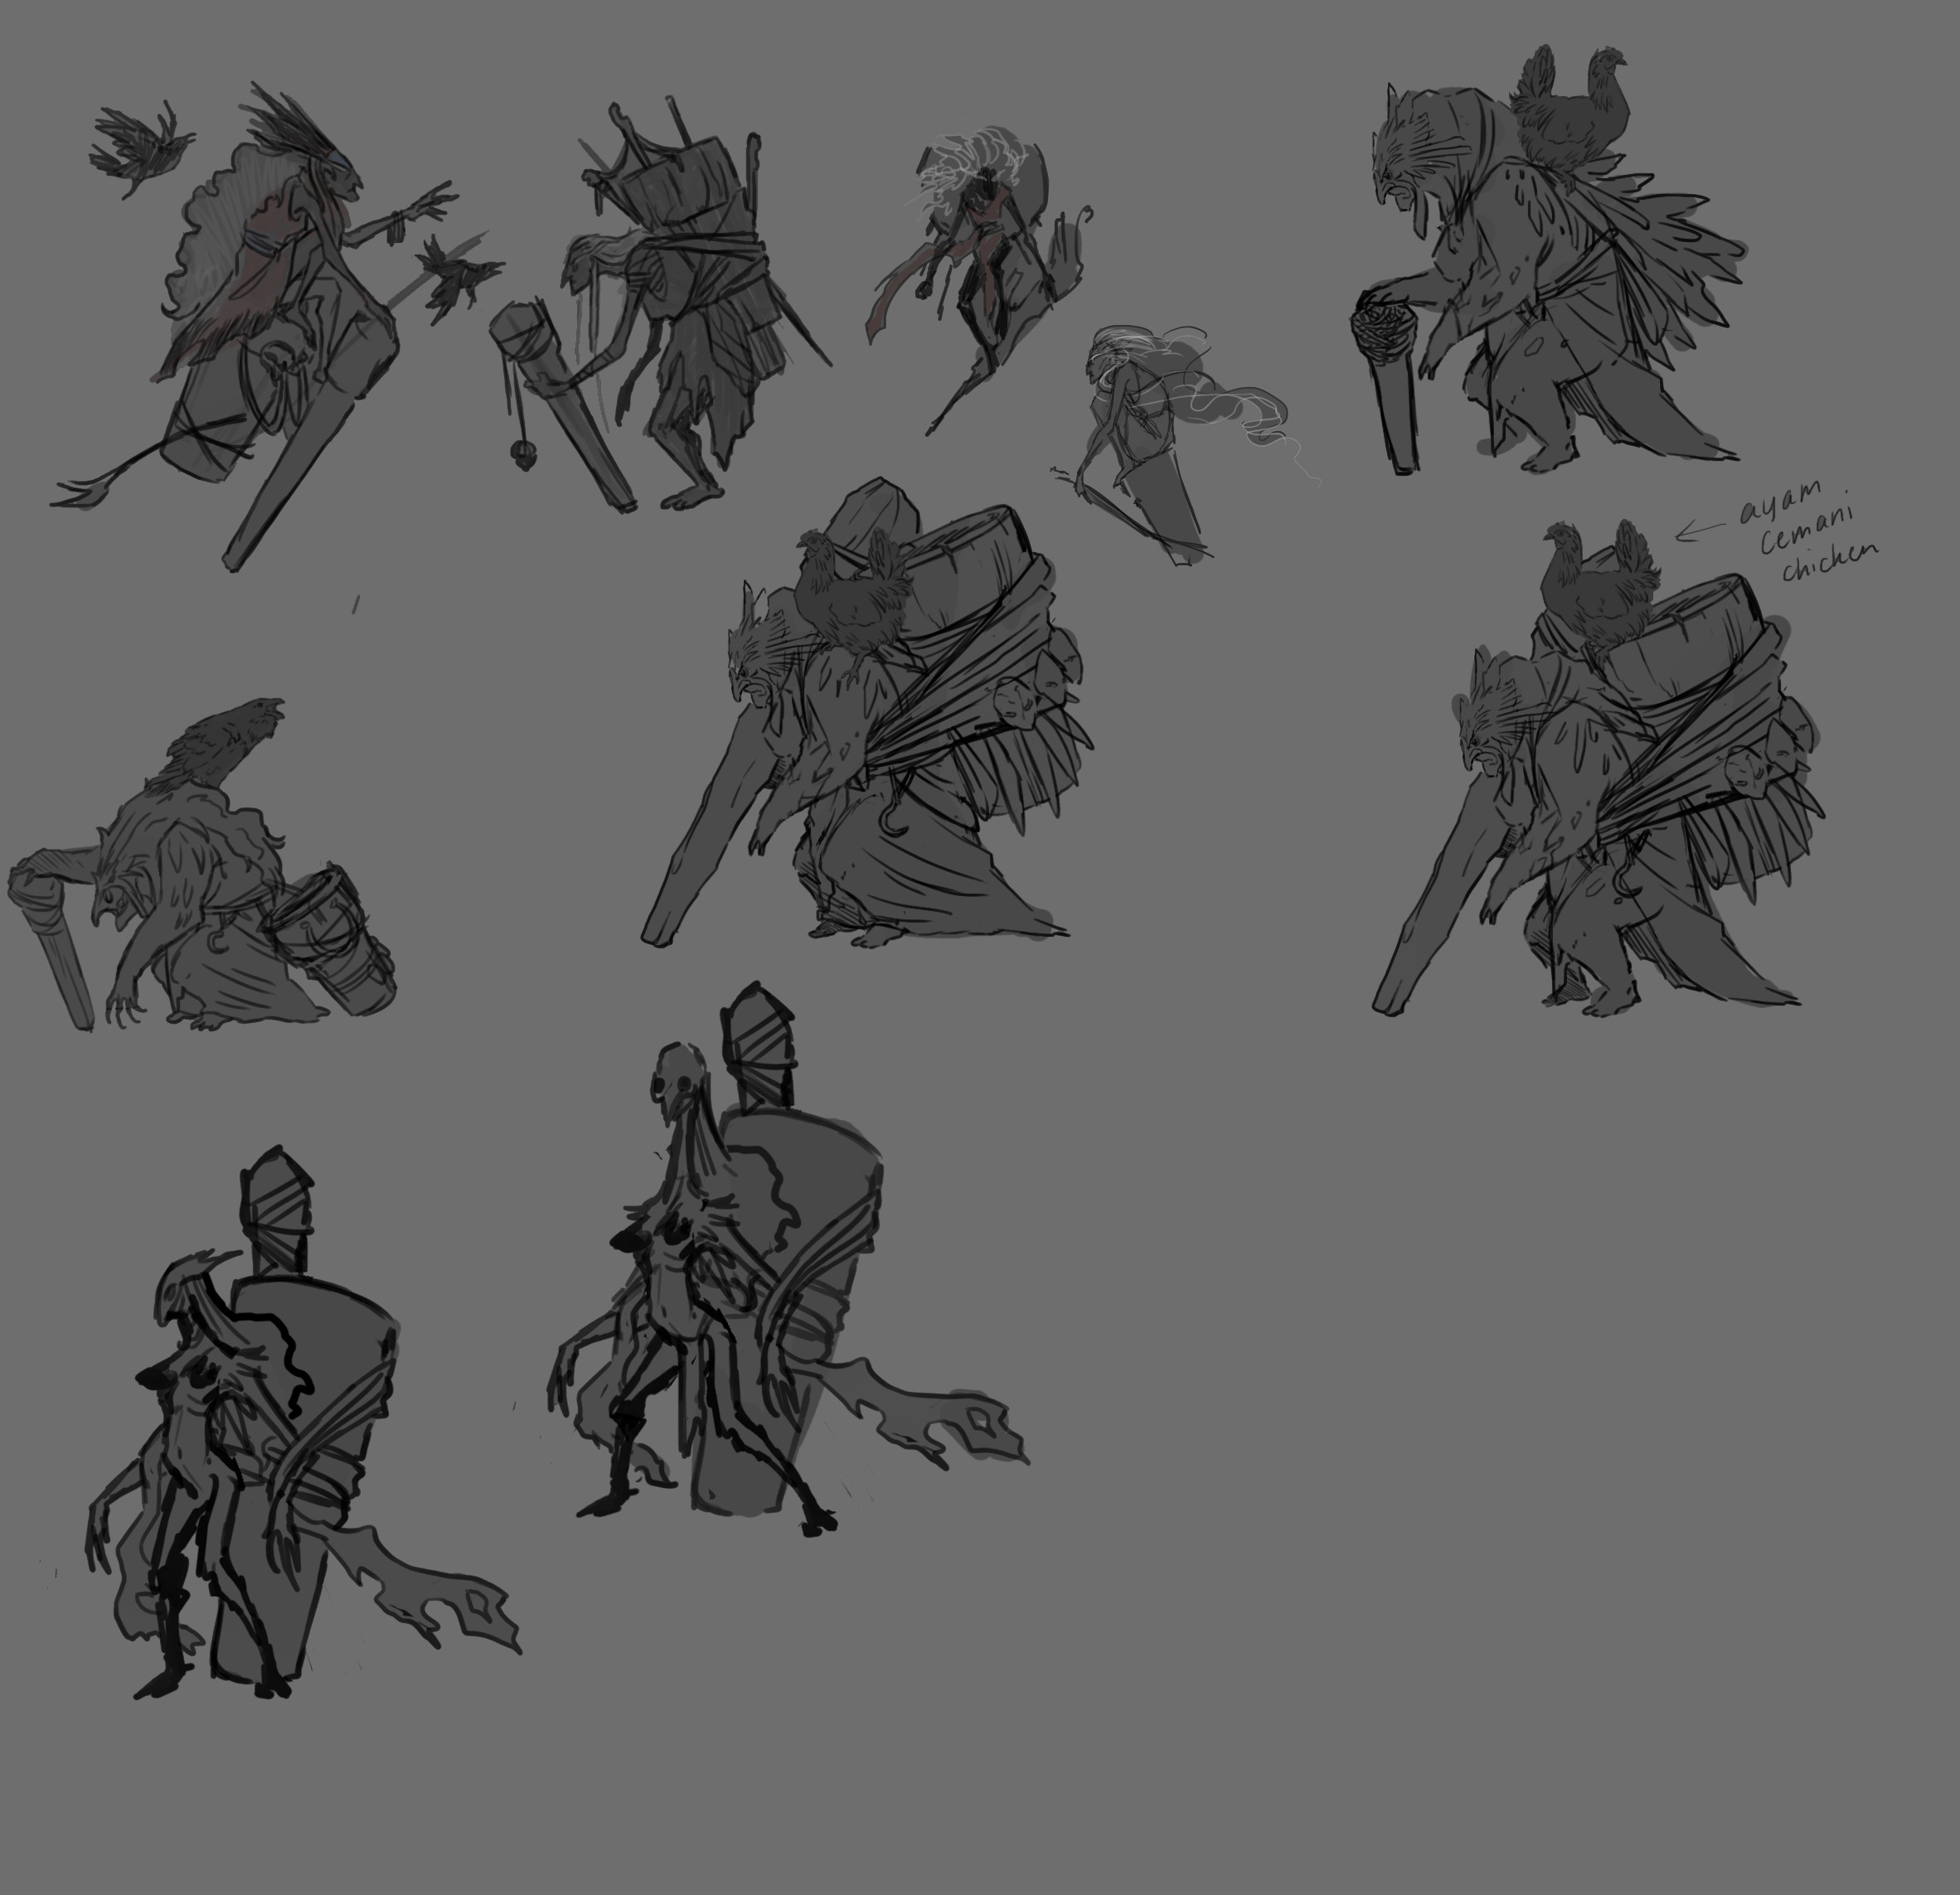 The first few thumbnails for Baba Yaga's design